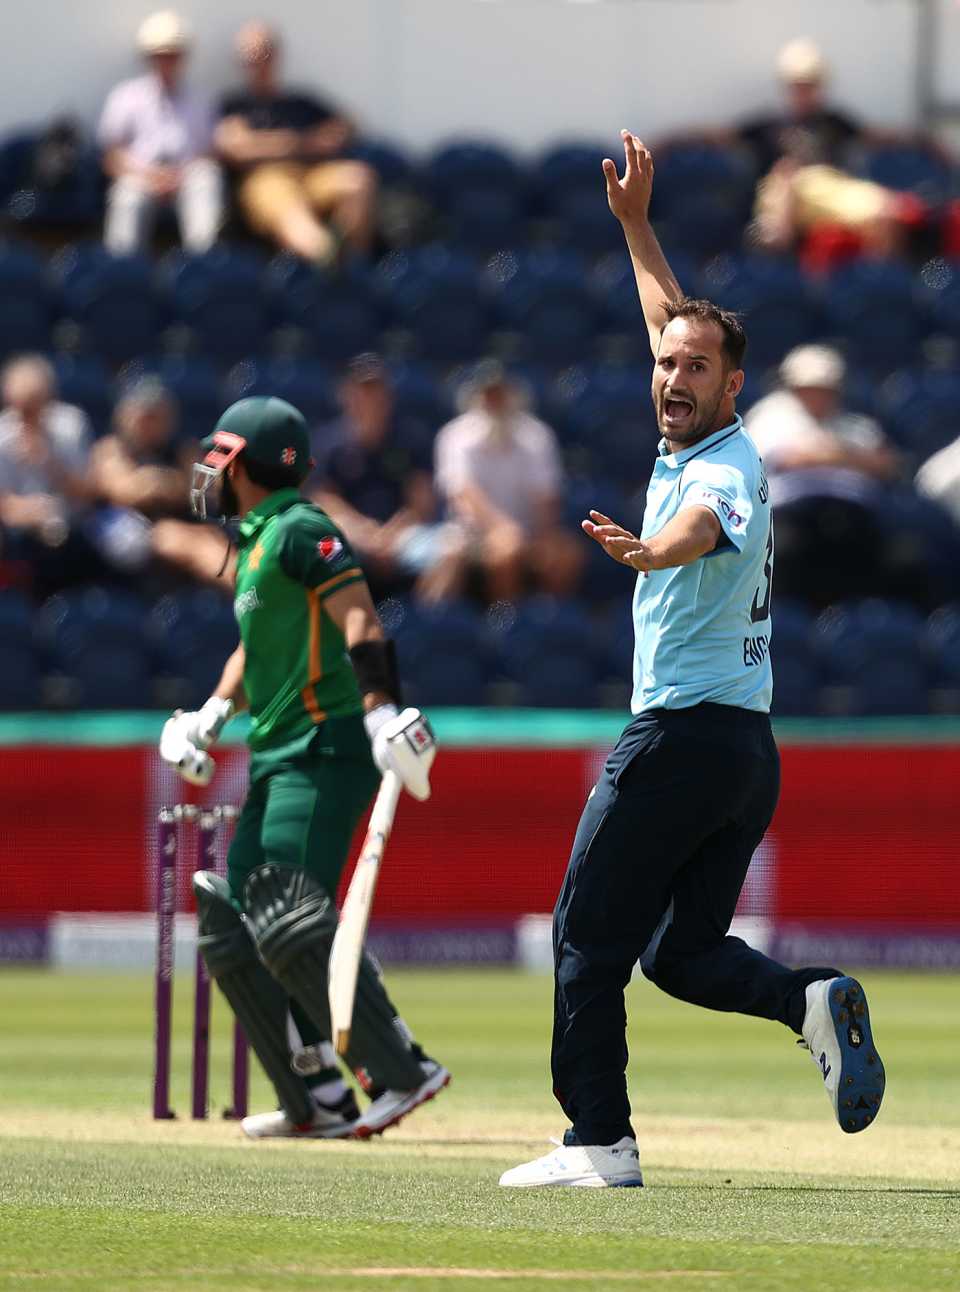 Lewis Gregory celebrates after taking the wicket of Mohammad Rizwan, England vs Pakistan, Cardiff, 1st ODI, July 8, 2021